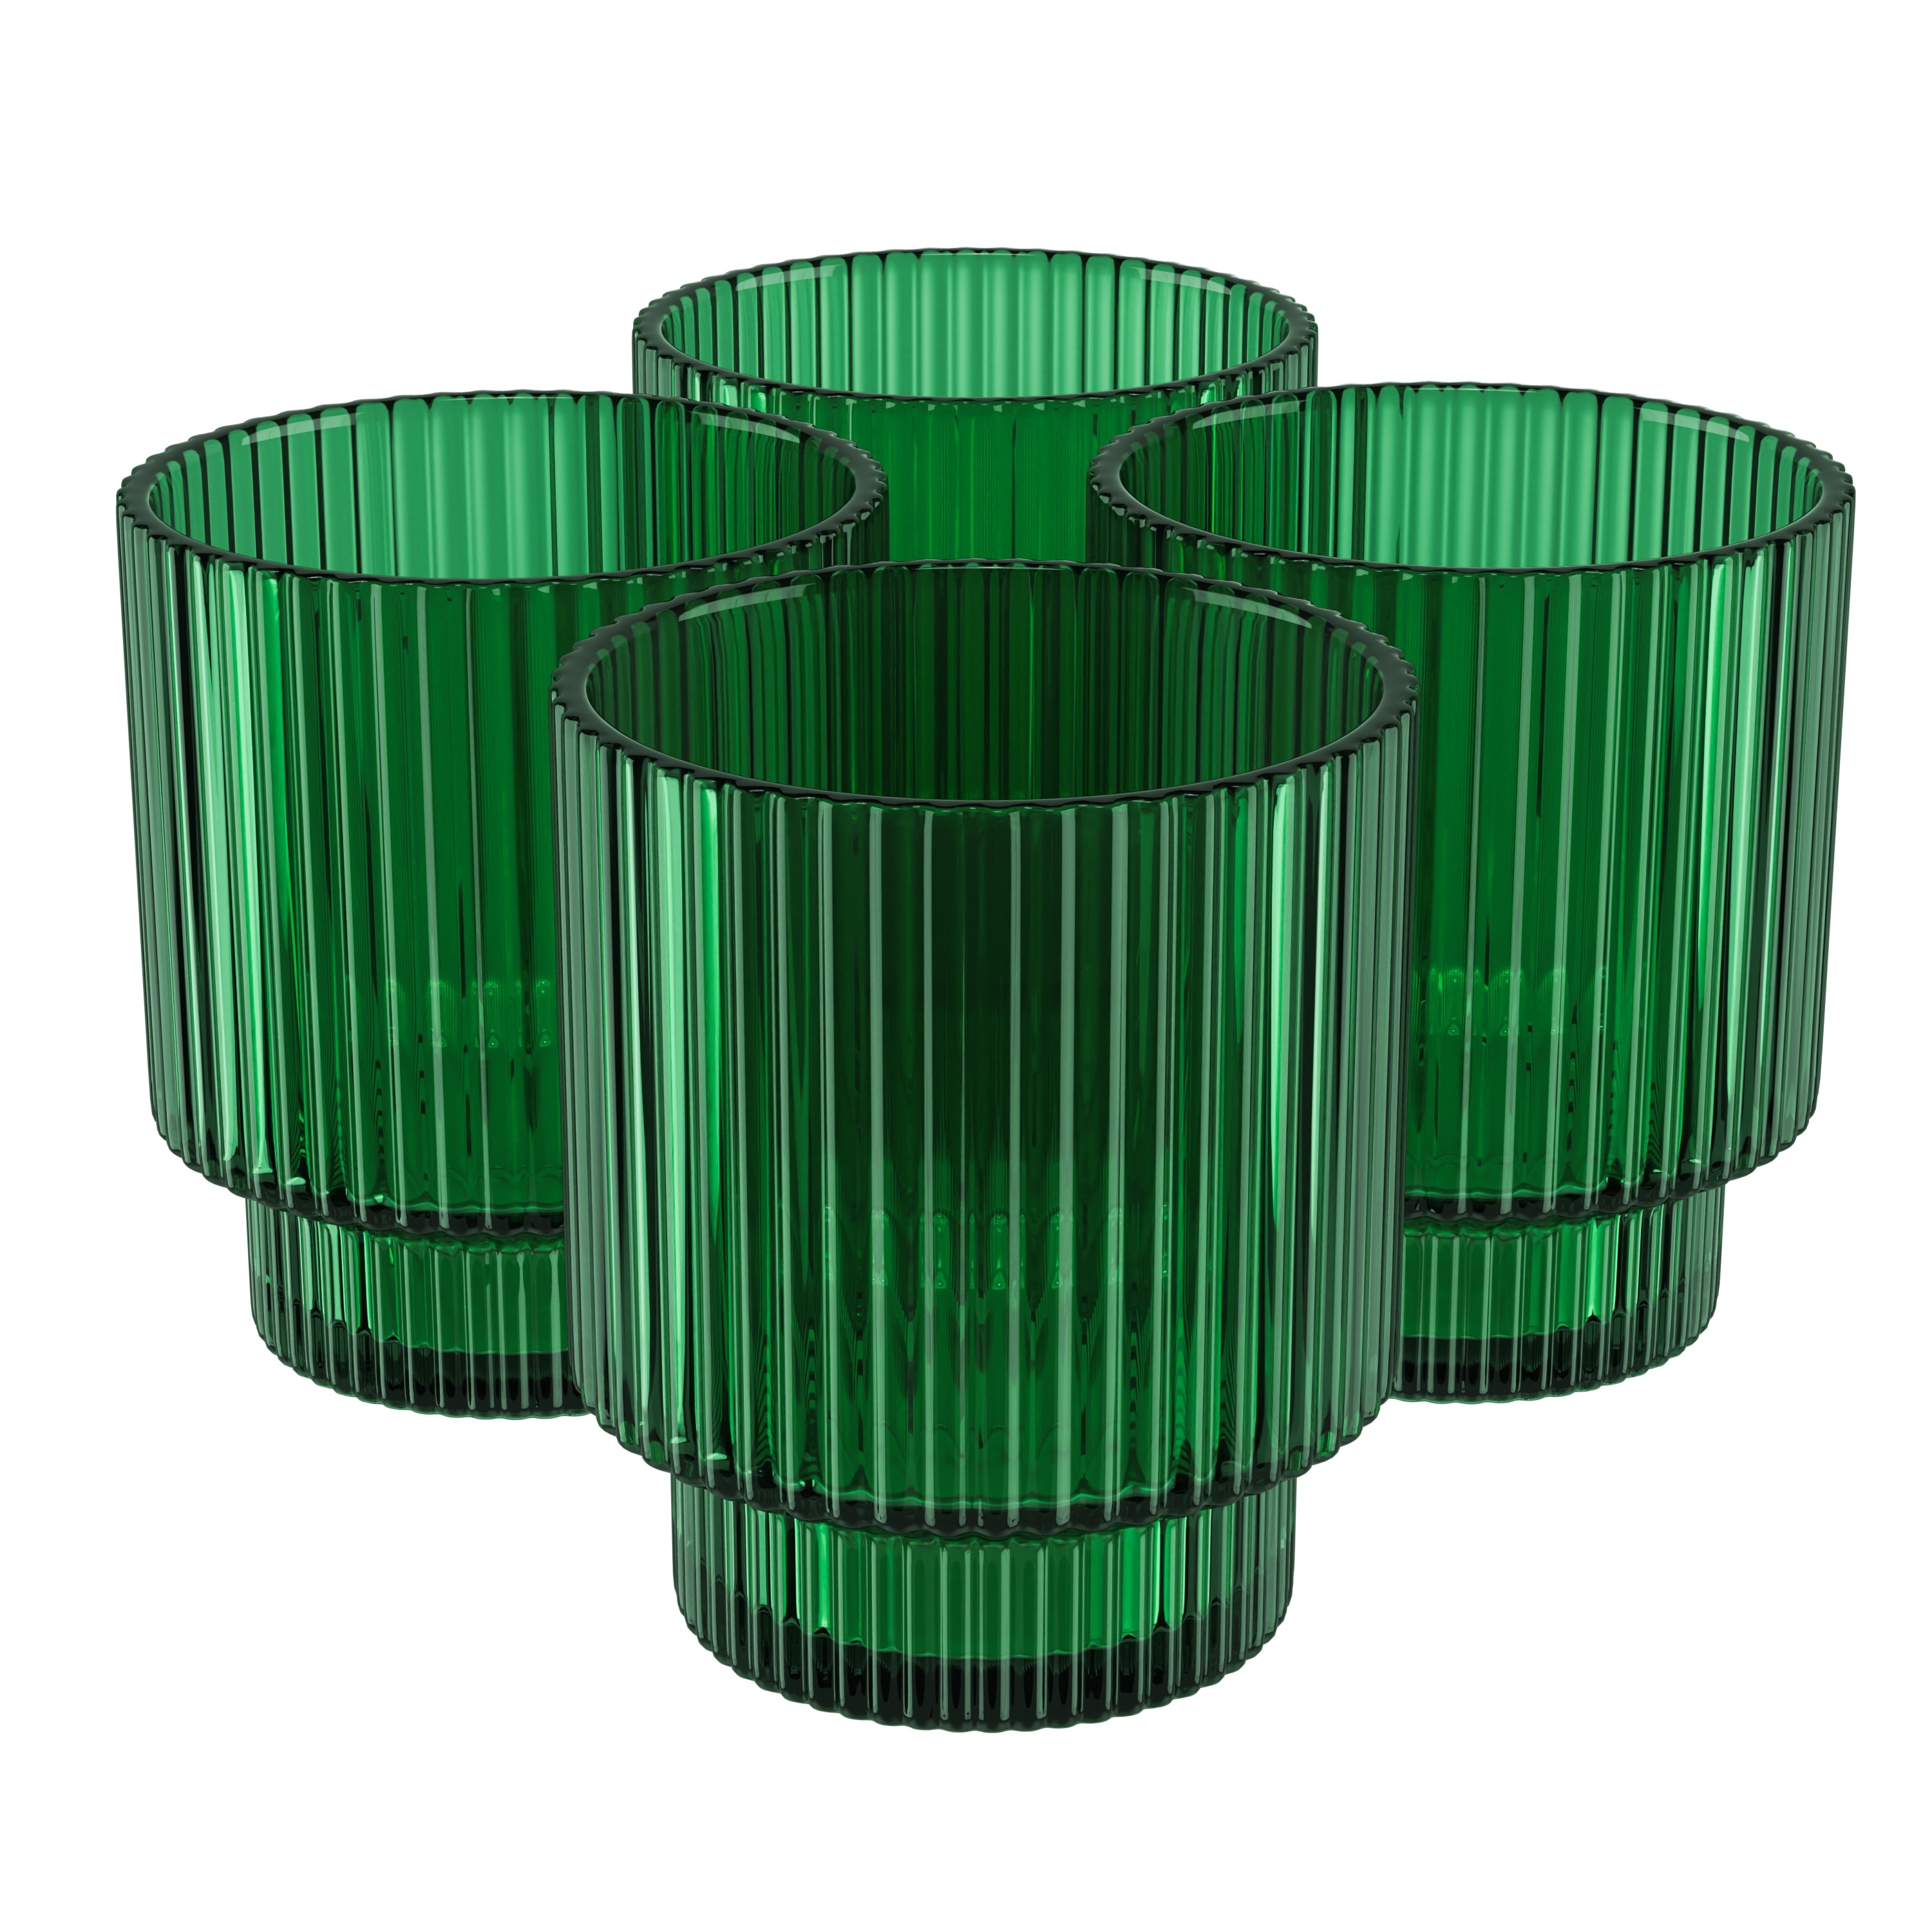 https://ak1.ostkcdn.com/images/products/is/images/direct/705998fe68fa1453a13a3f13db937669cc731840/American-Atelier-Vintage-Art-Deco-Fluted-Drinking-Glasses-Set-of-4.jpg